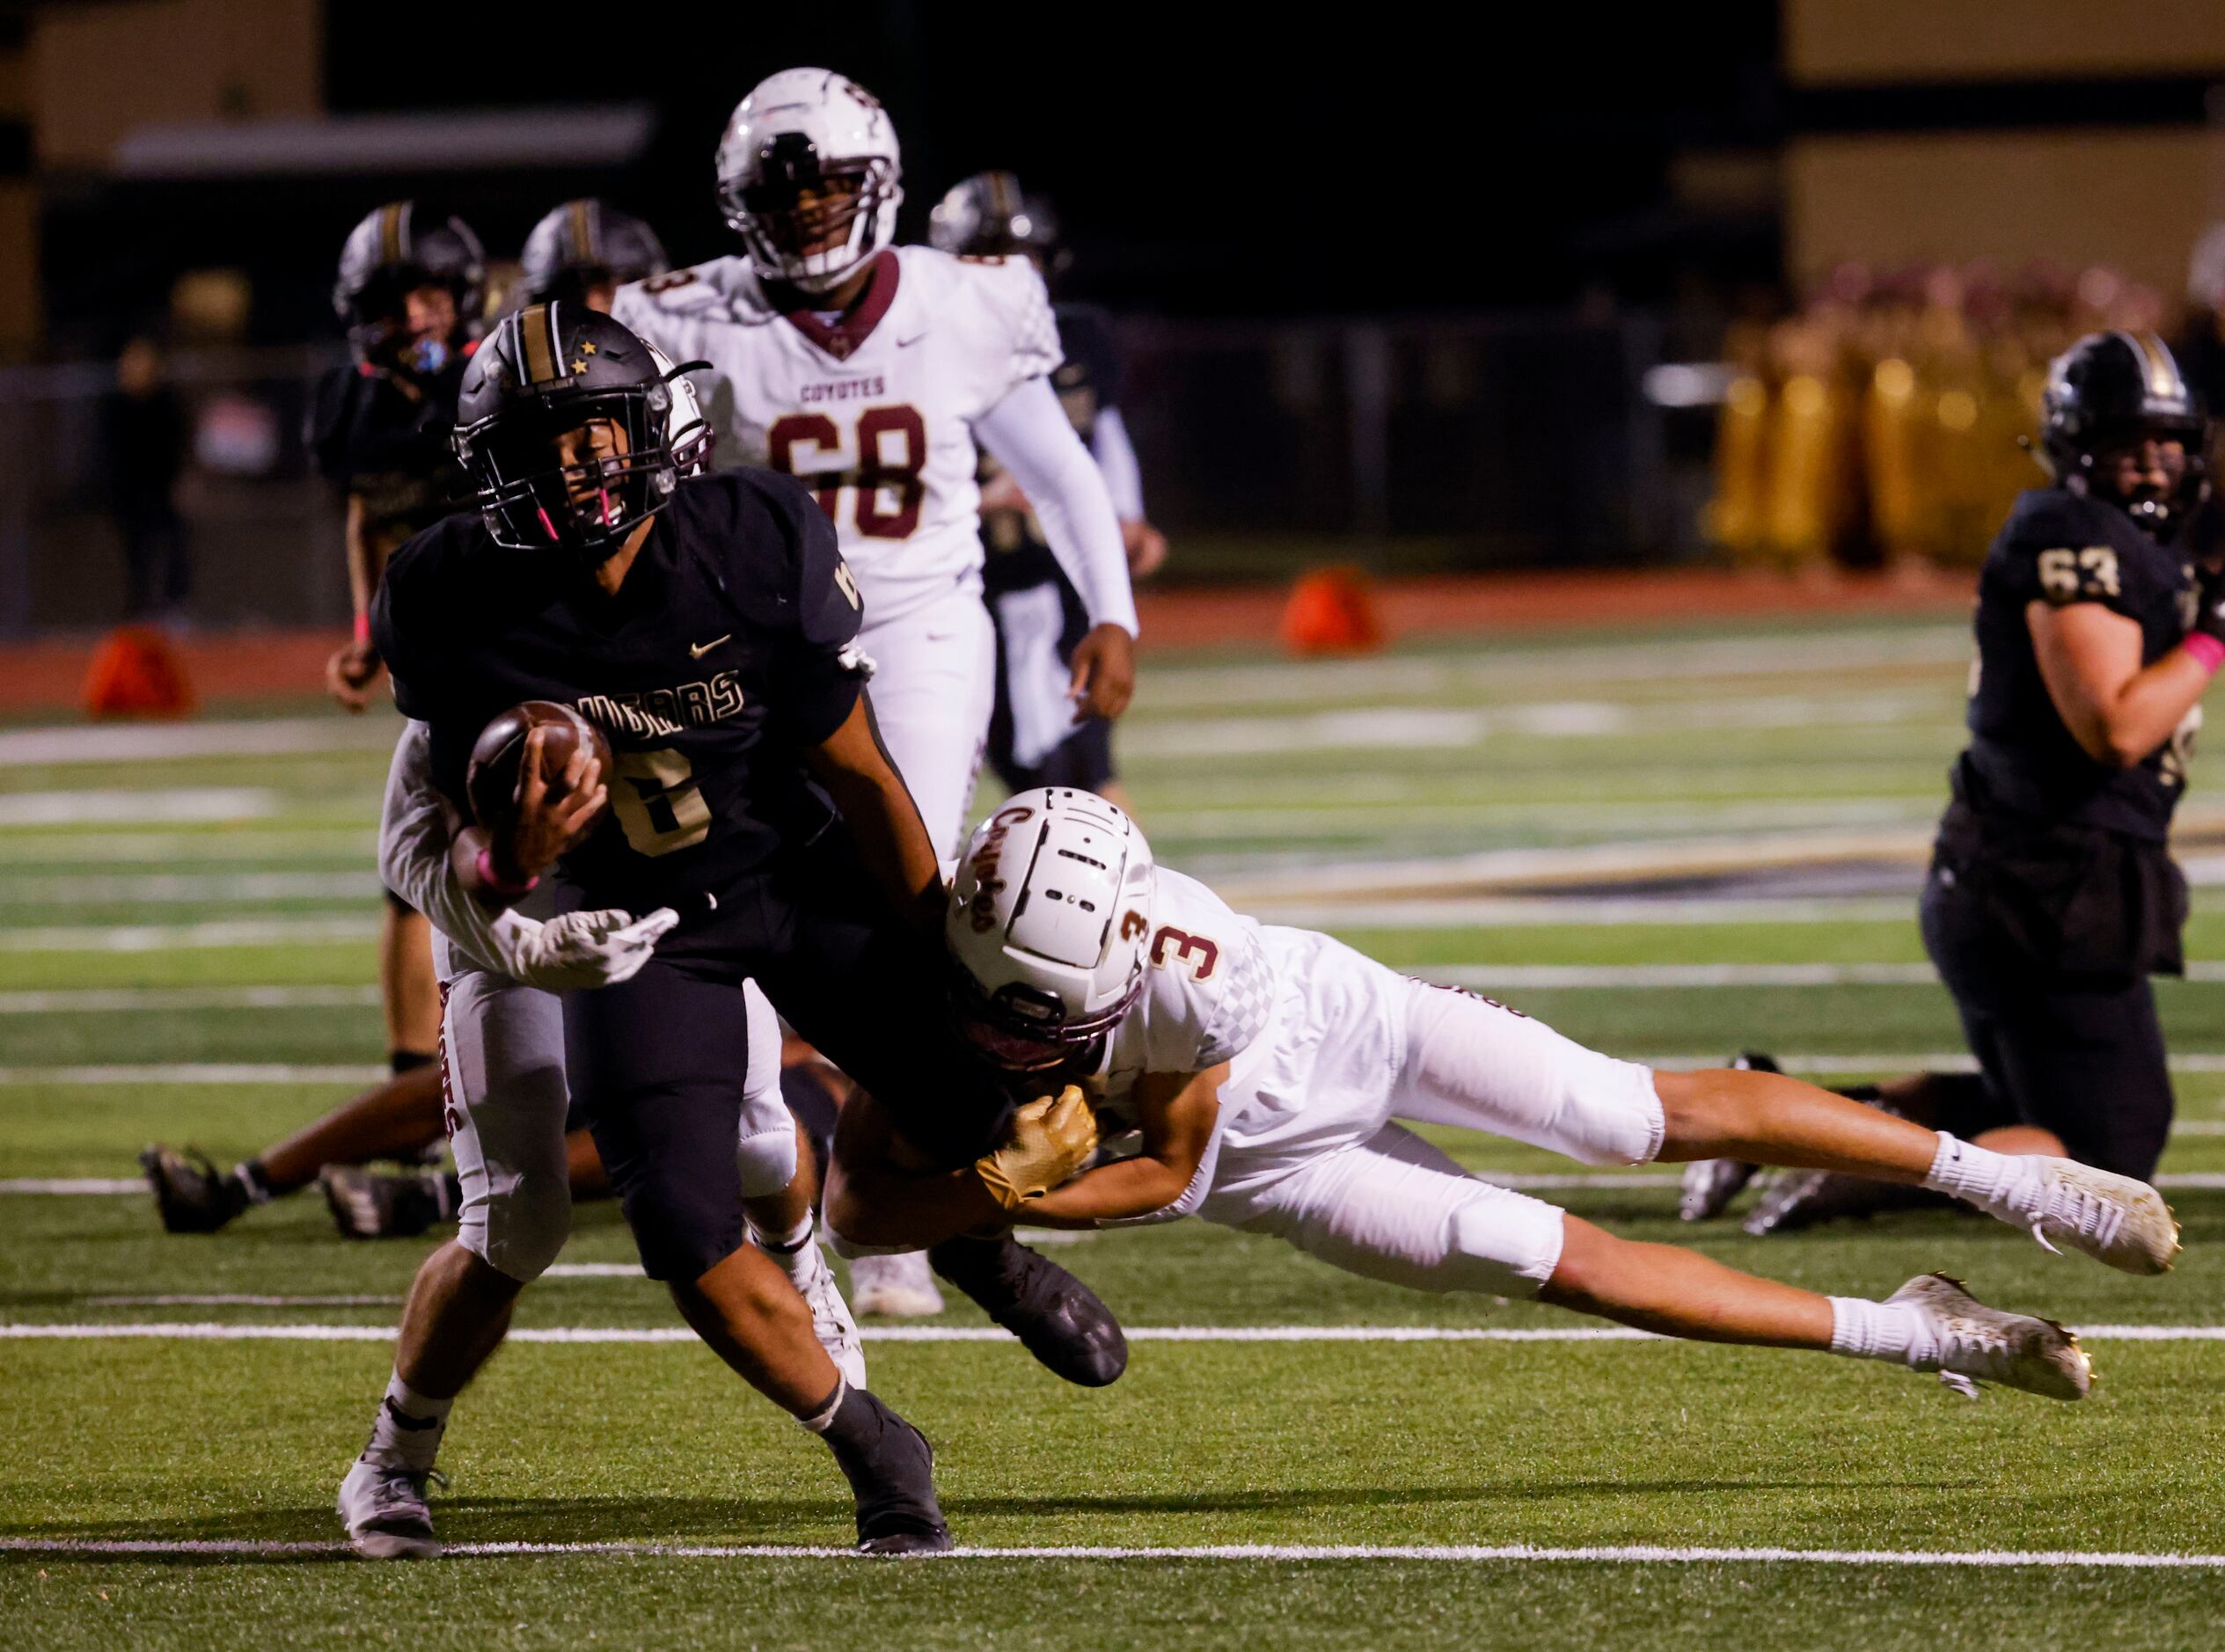 The Colony’s running back Kamden Wesley (6) is stopped by Frisco Heritage’s DB Quinton Clay...